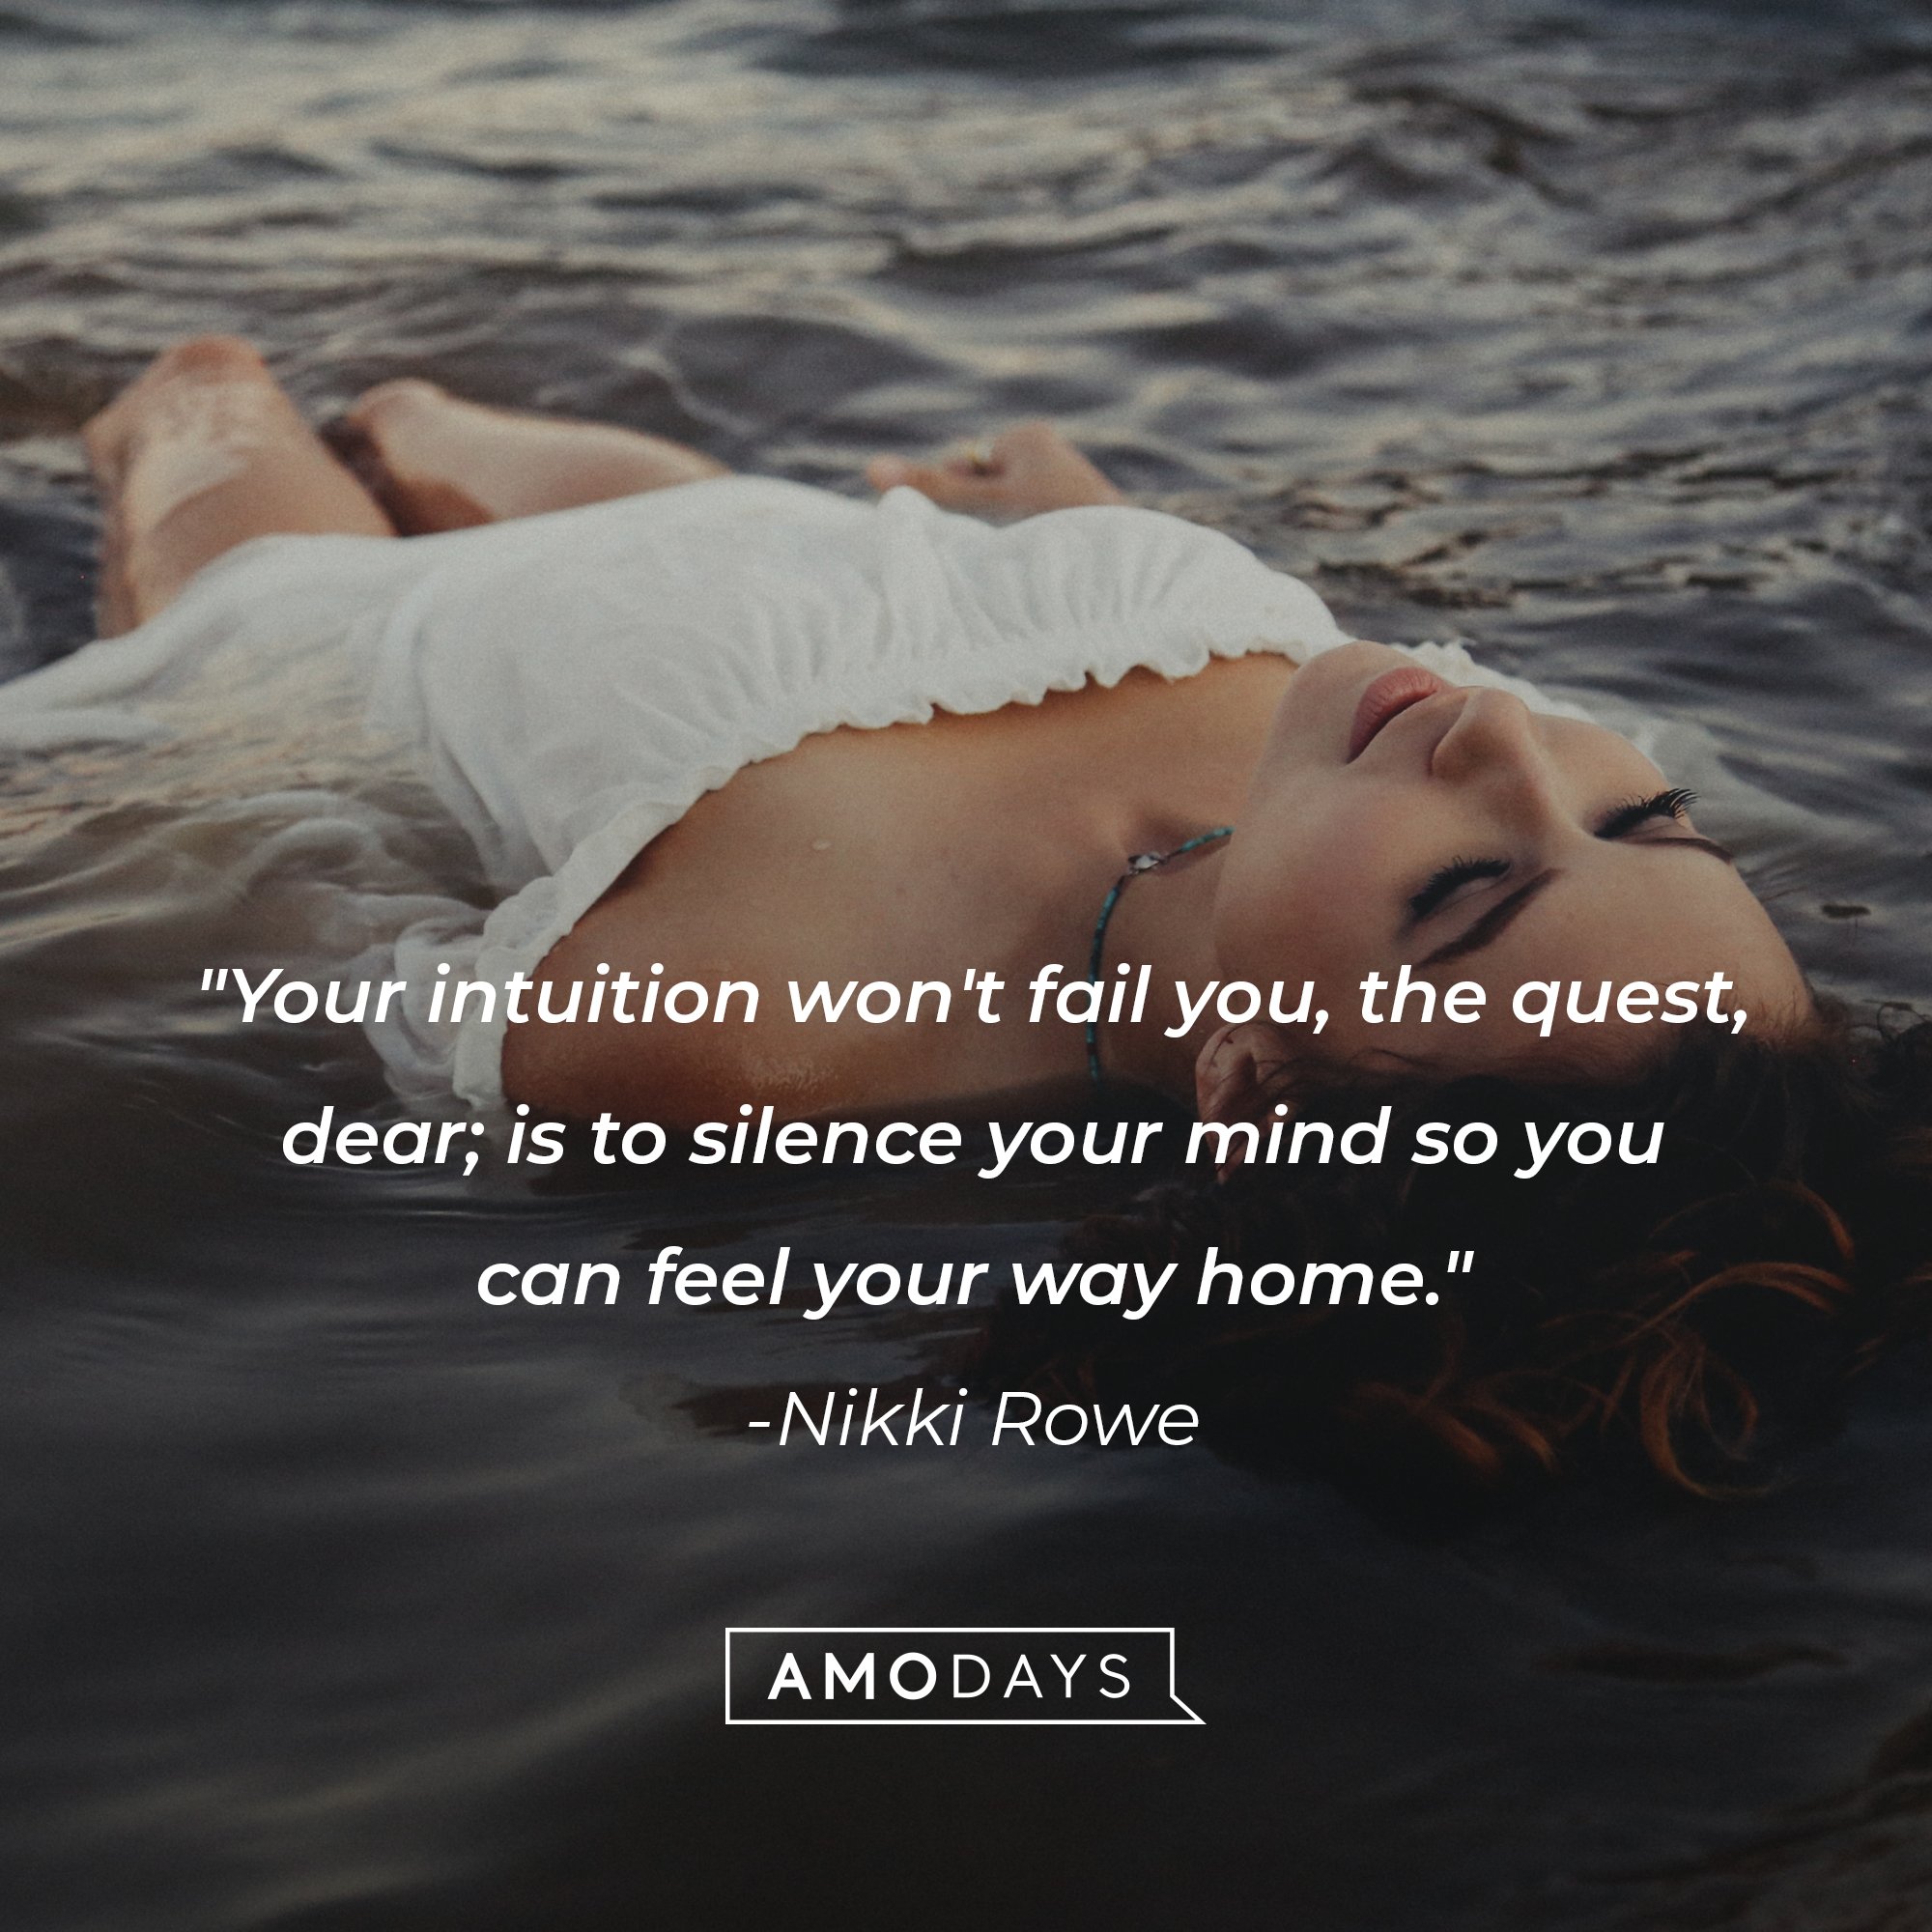 Nikki Rowe’s quote: "Your intuition won't fail you, the quest, dear; is to silence your mind so you can feel your way home." | Image: AmoDays 